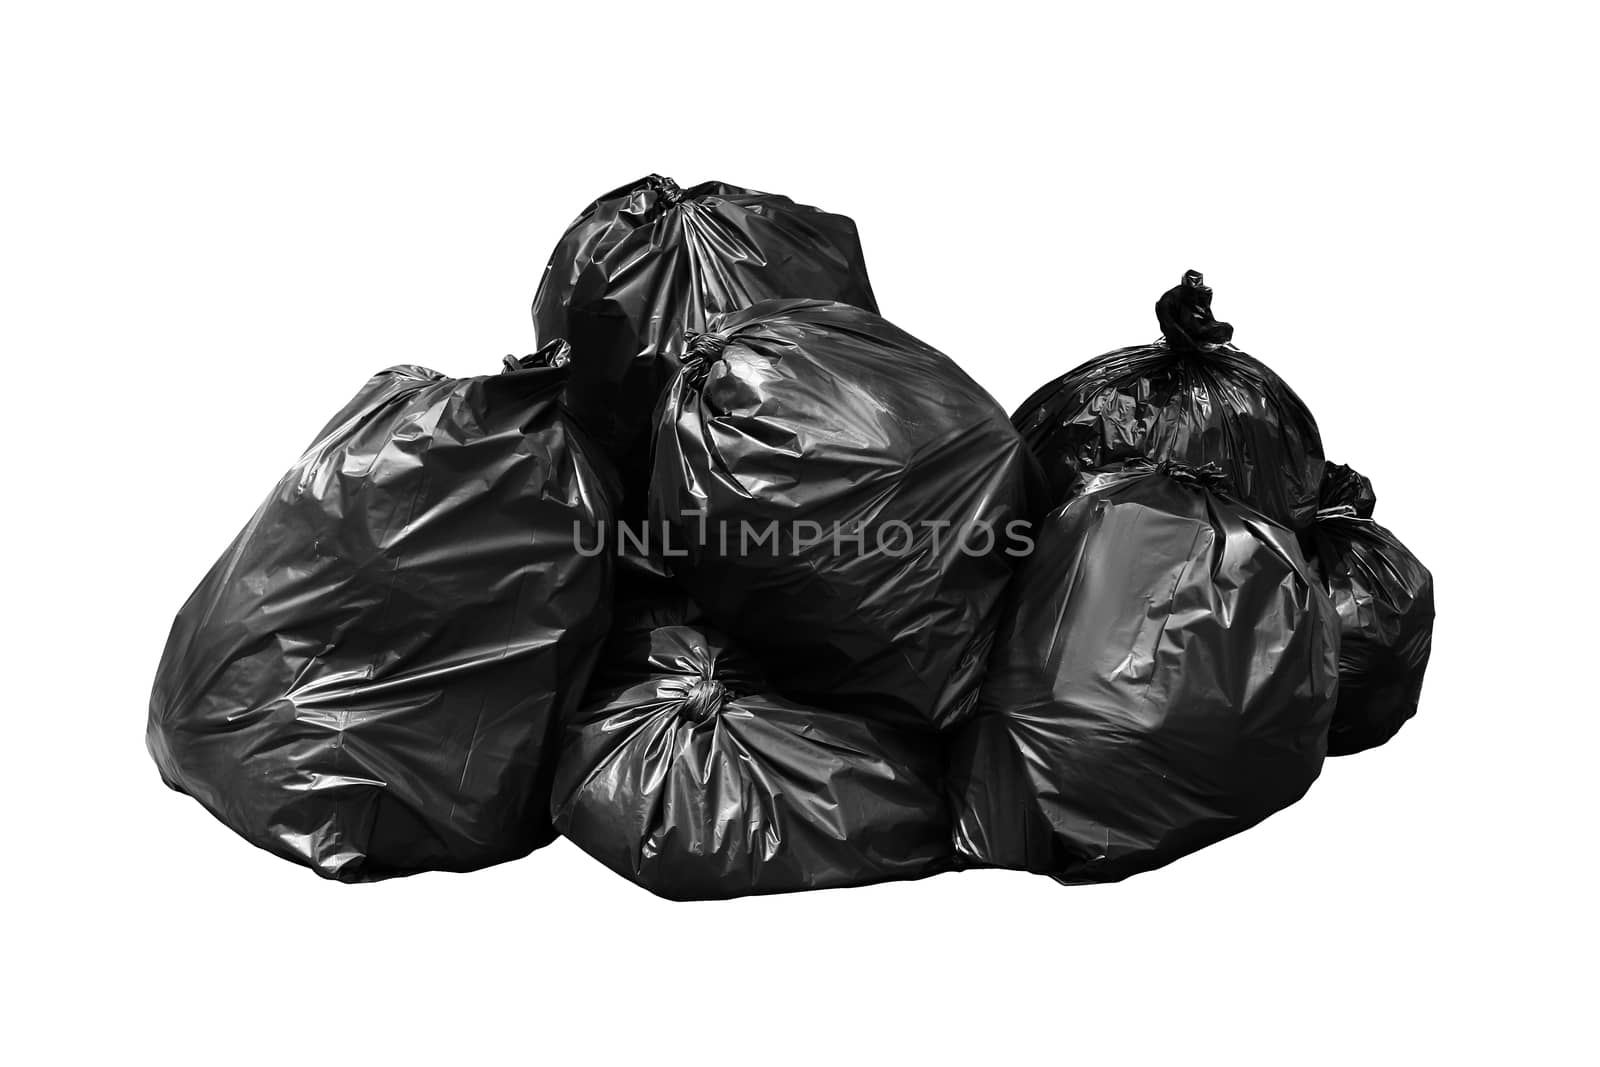 Bin bag garbage, Bin,Trash, Garbage, Rubbish, Plastic Bags pile isolated on background white by cgdeaw